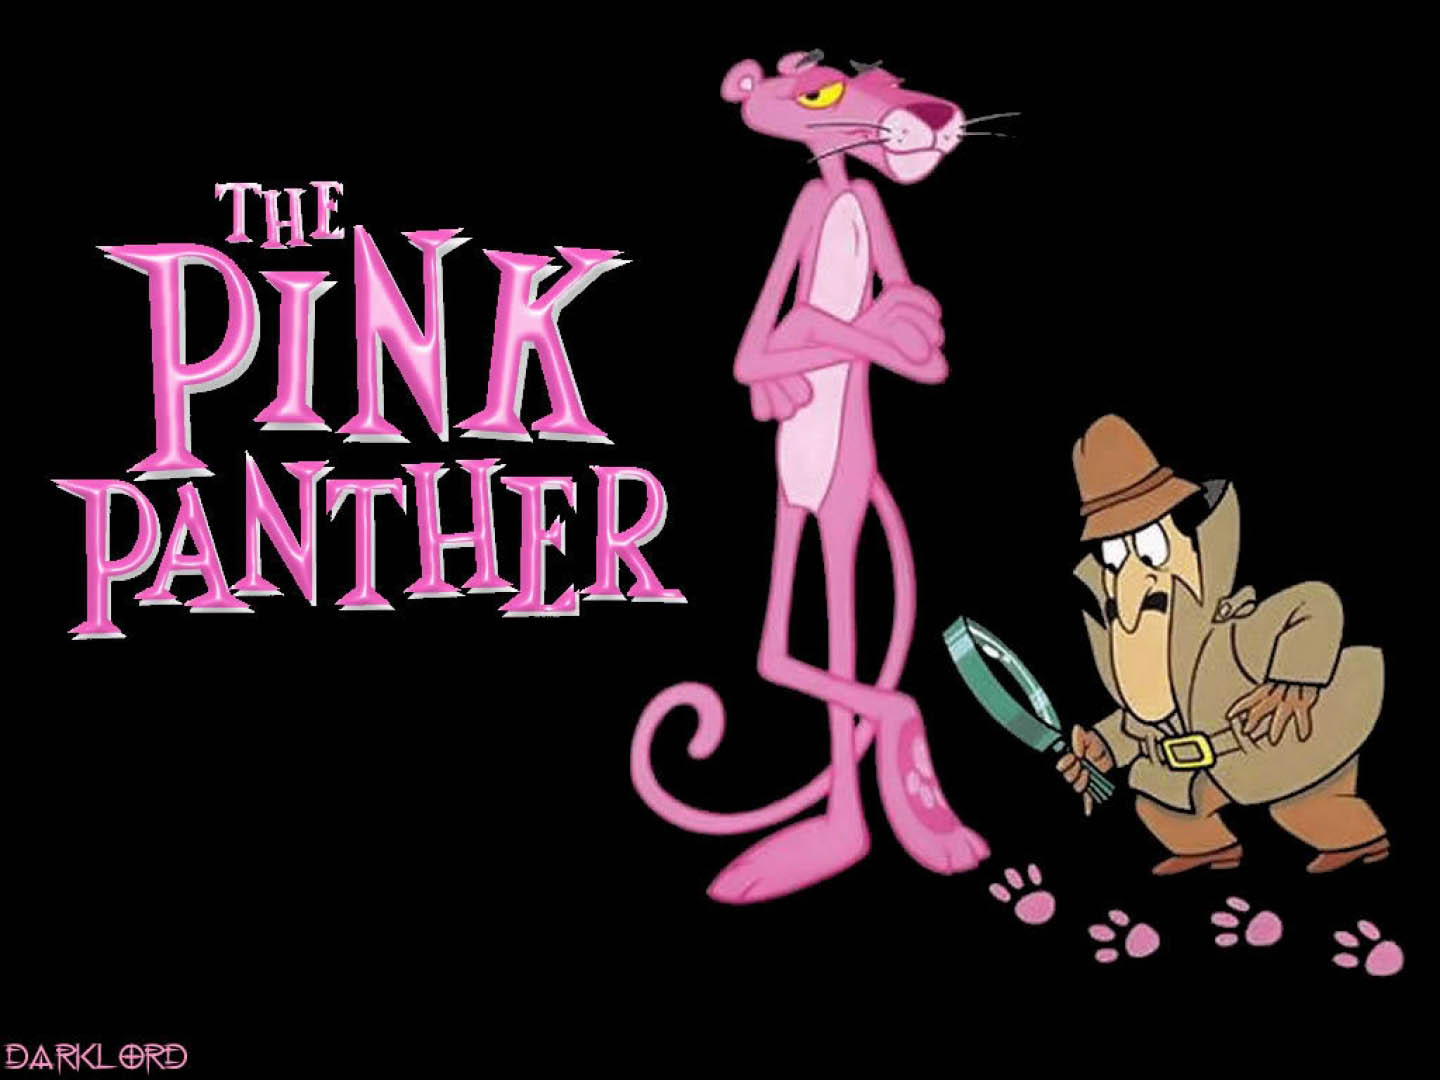 The Pink Panther VS Sonic the Hedgehog 